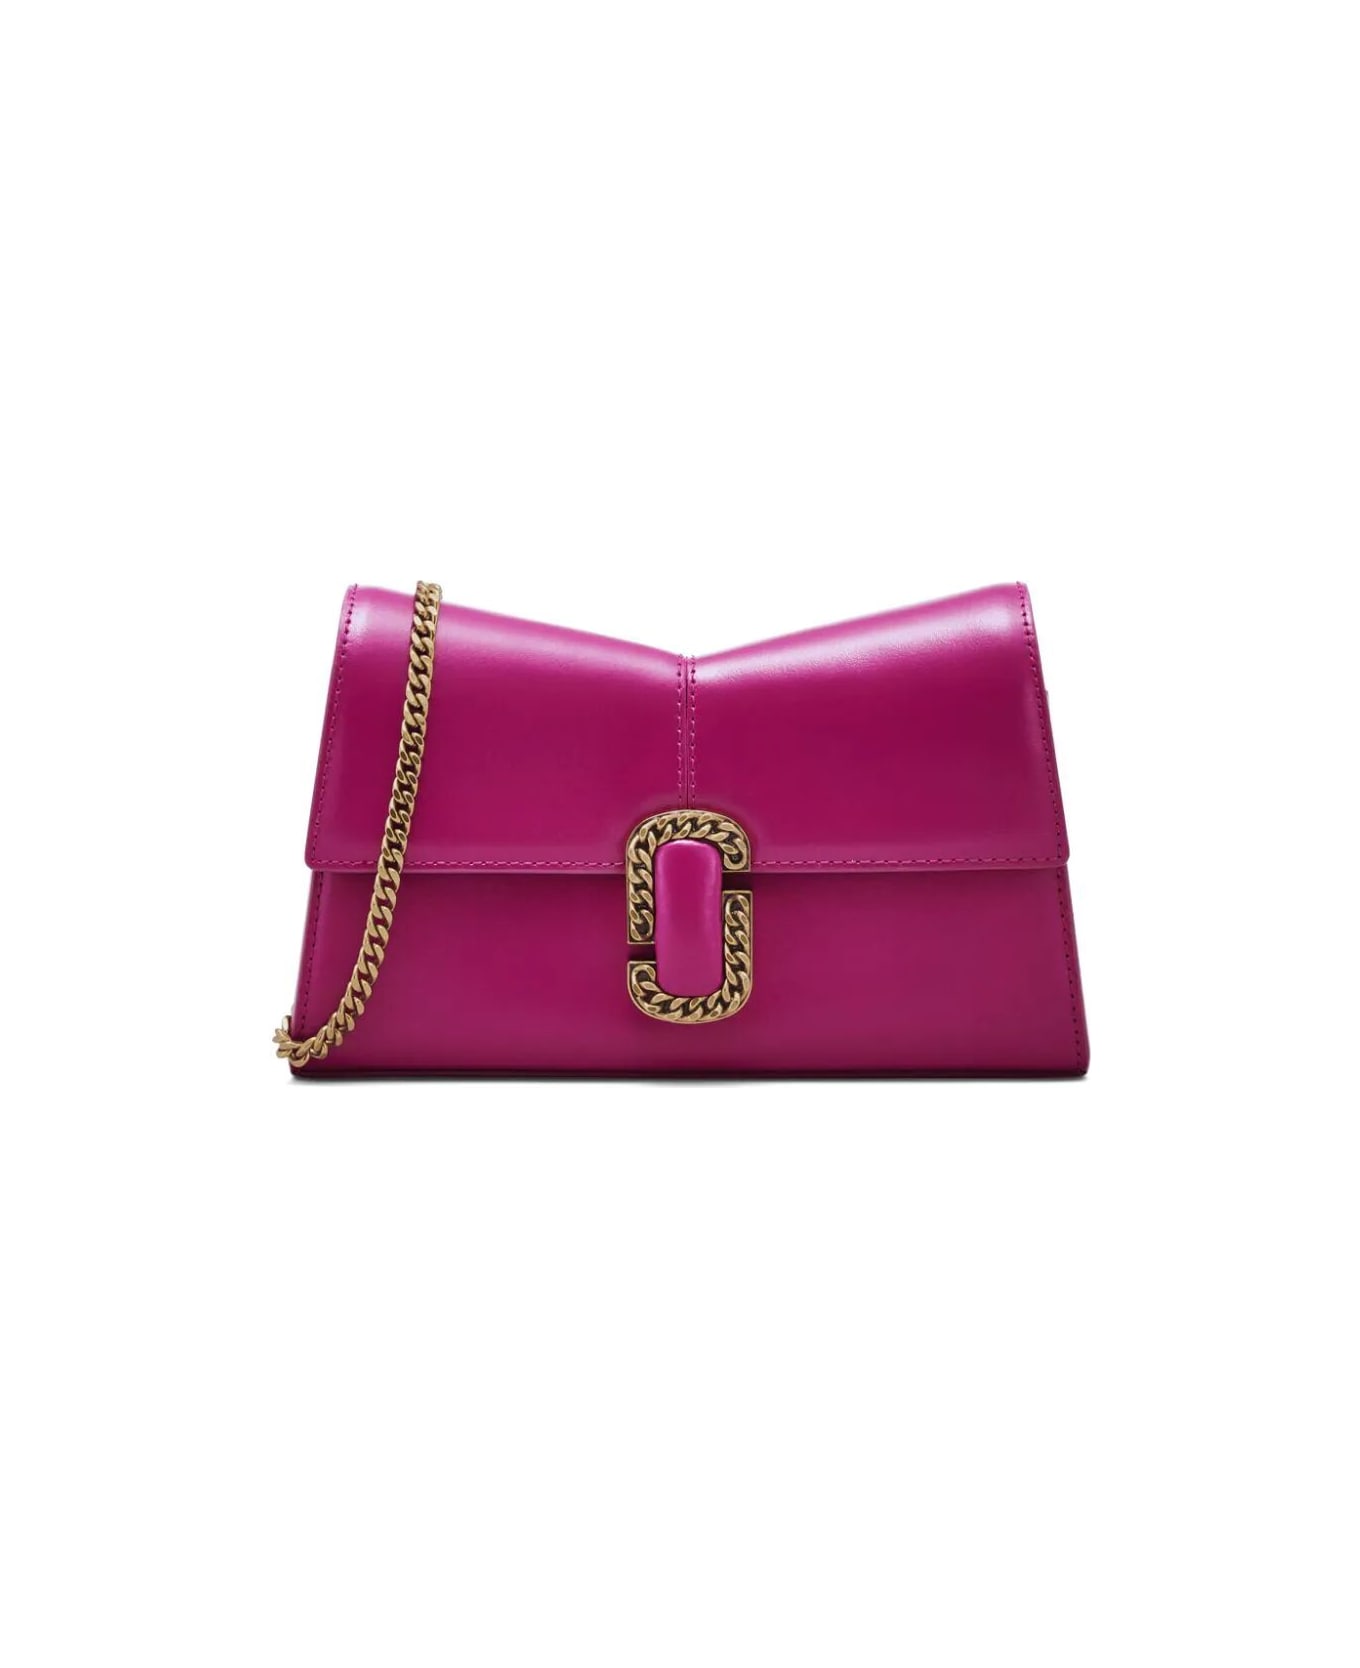 Marc Jacobs The St. Marc Chain Wallet - Lipstick Pink